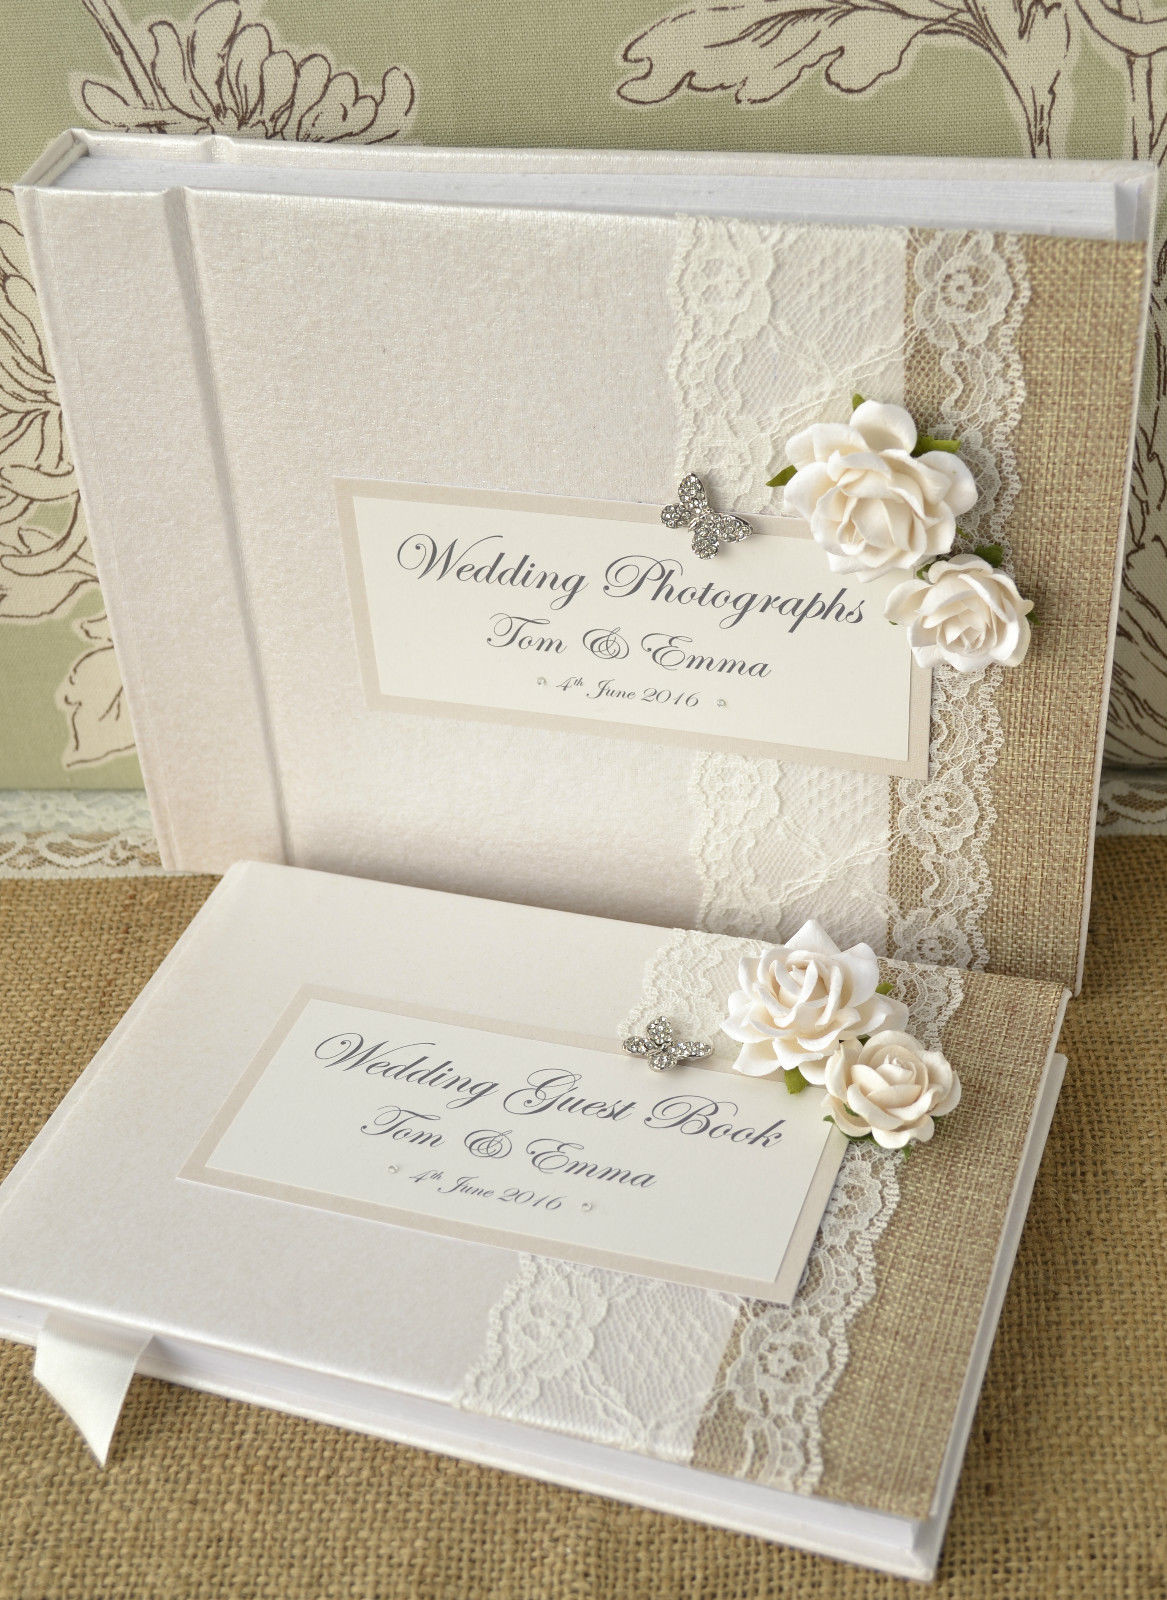 Luxury Wedding Guest Book
 Luxury Personalised Wedding Guest Book & Album Set Lace